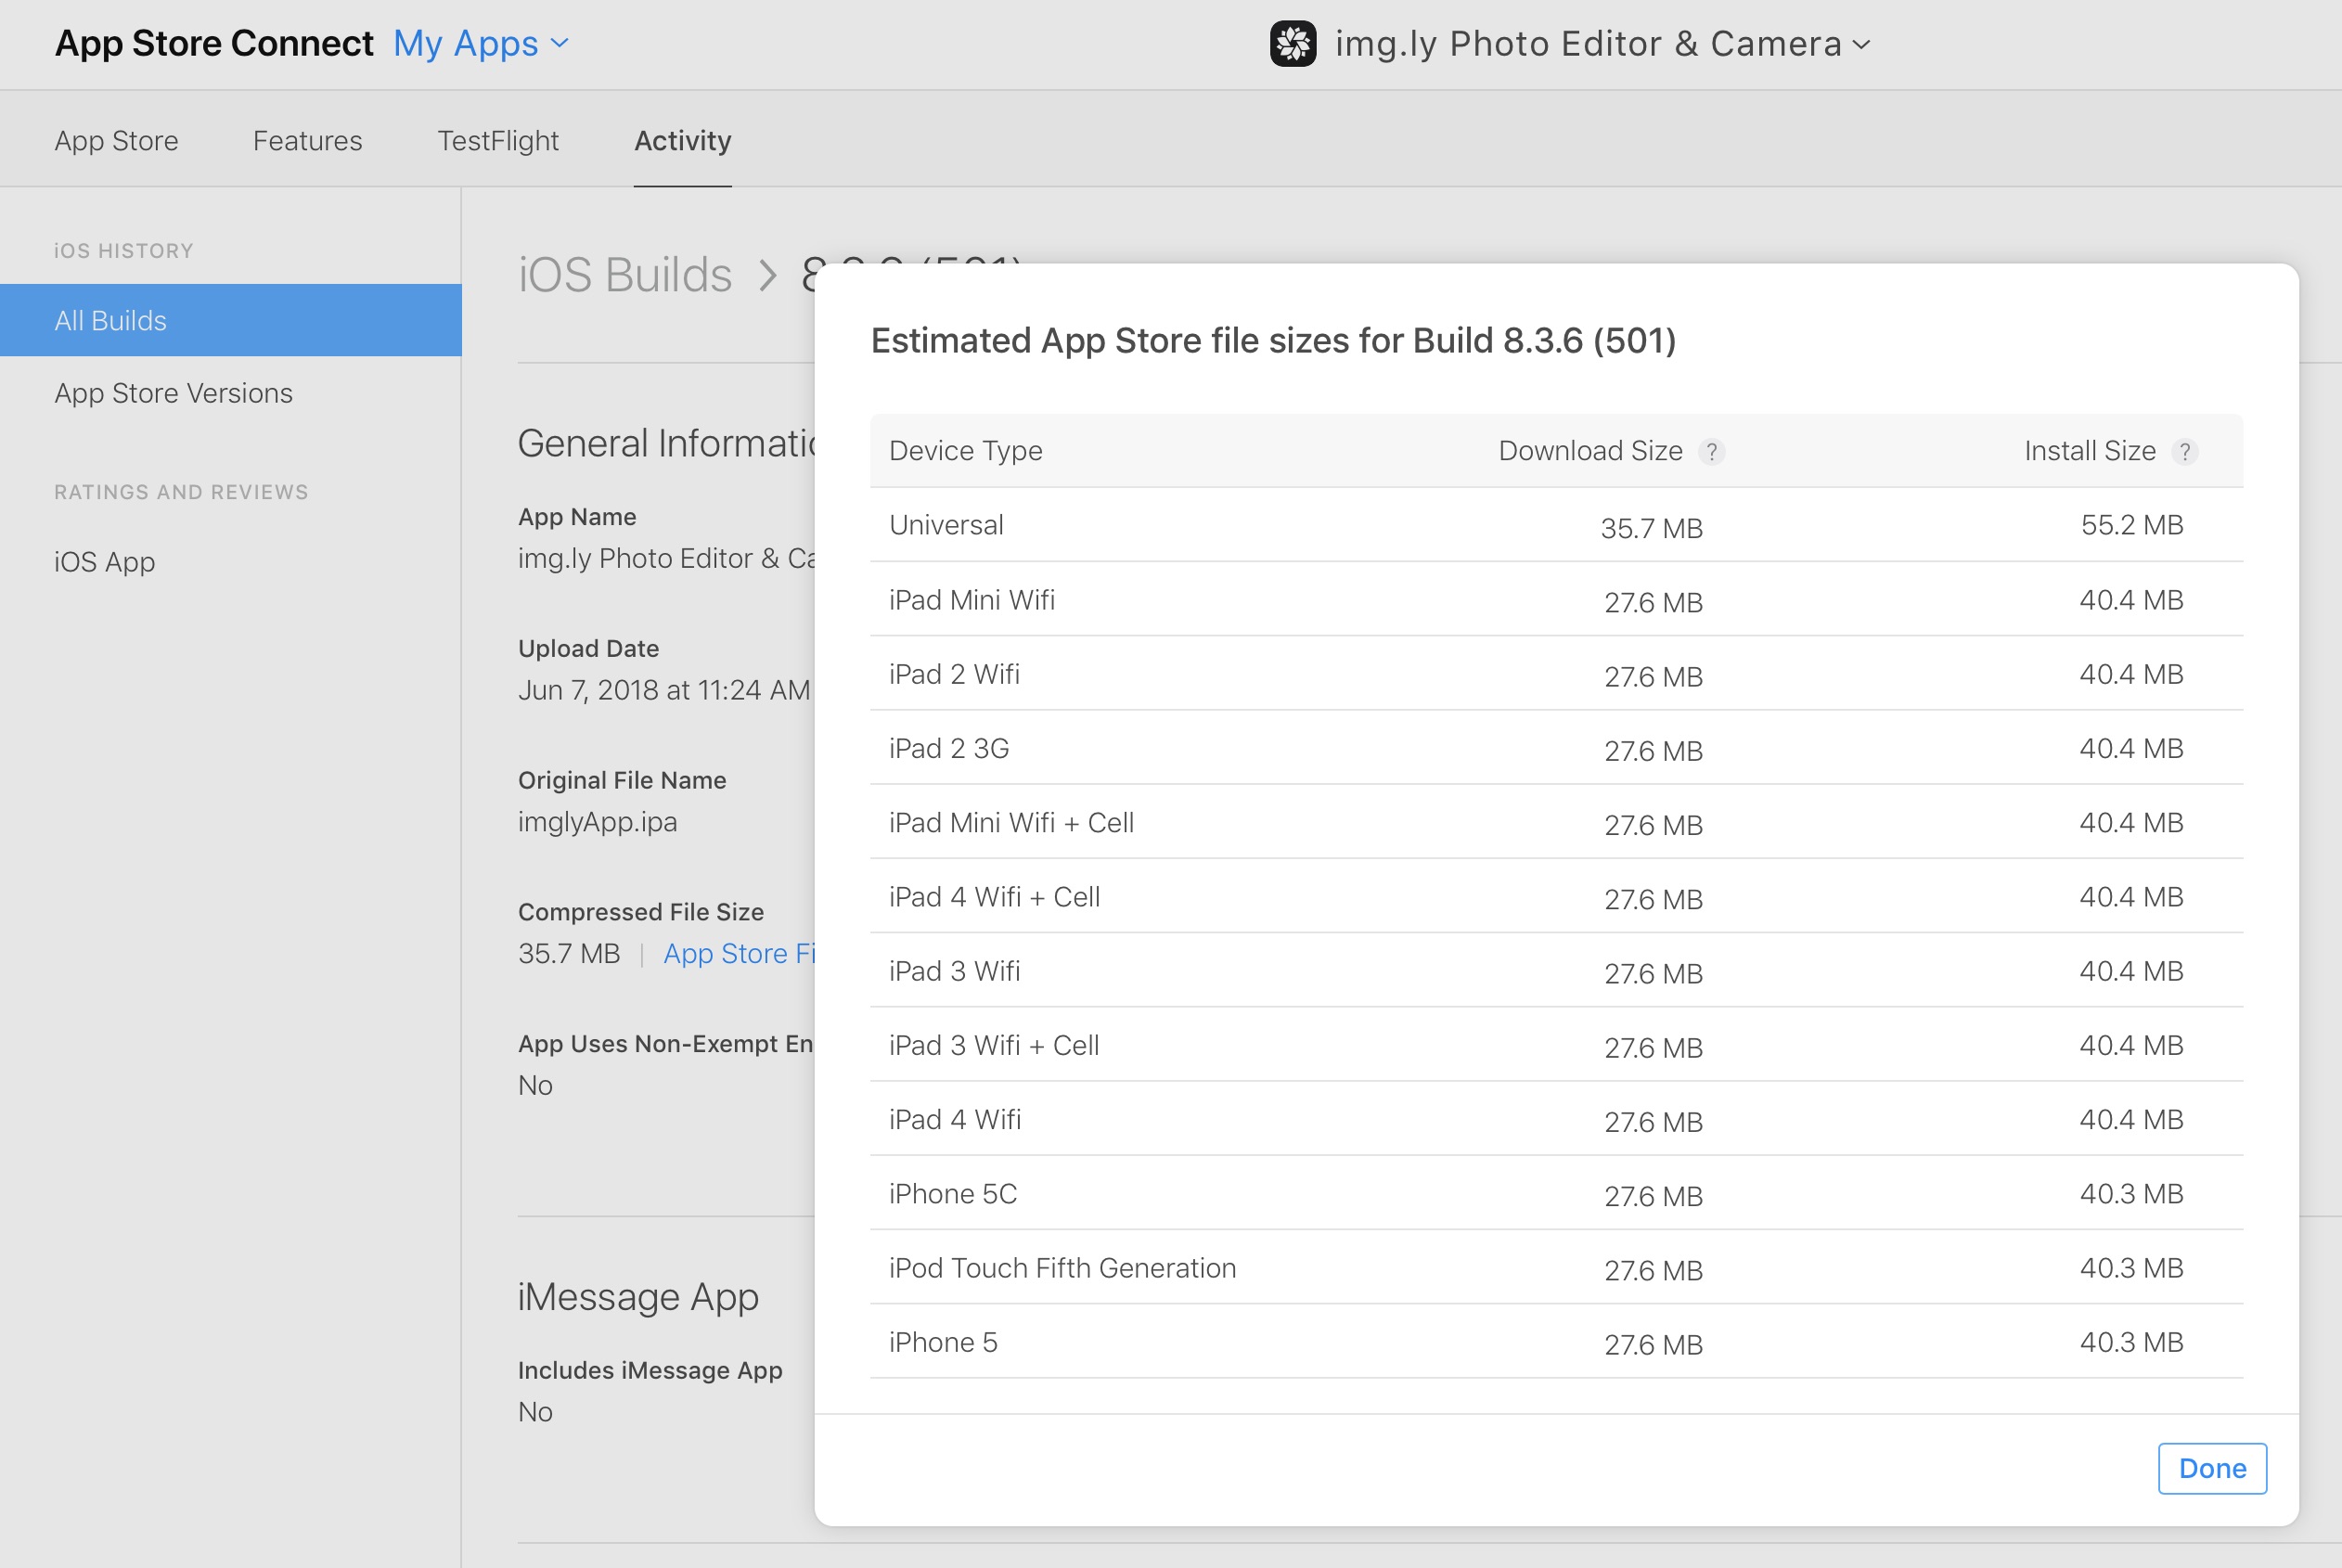 App Store File Sizes